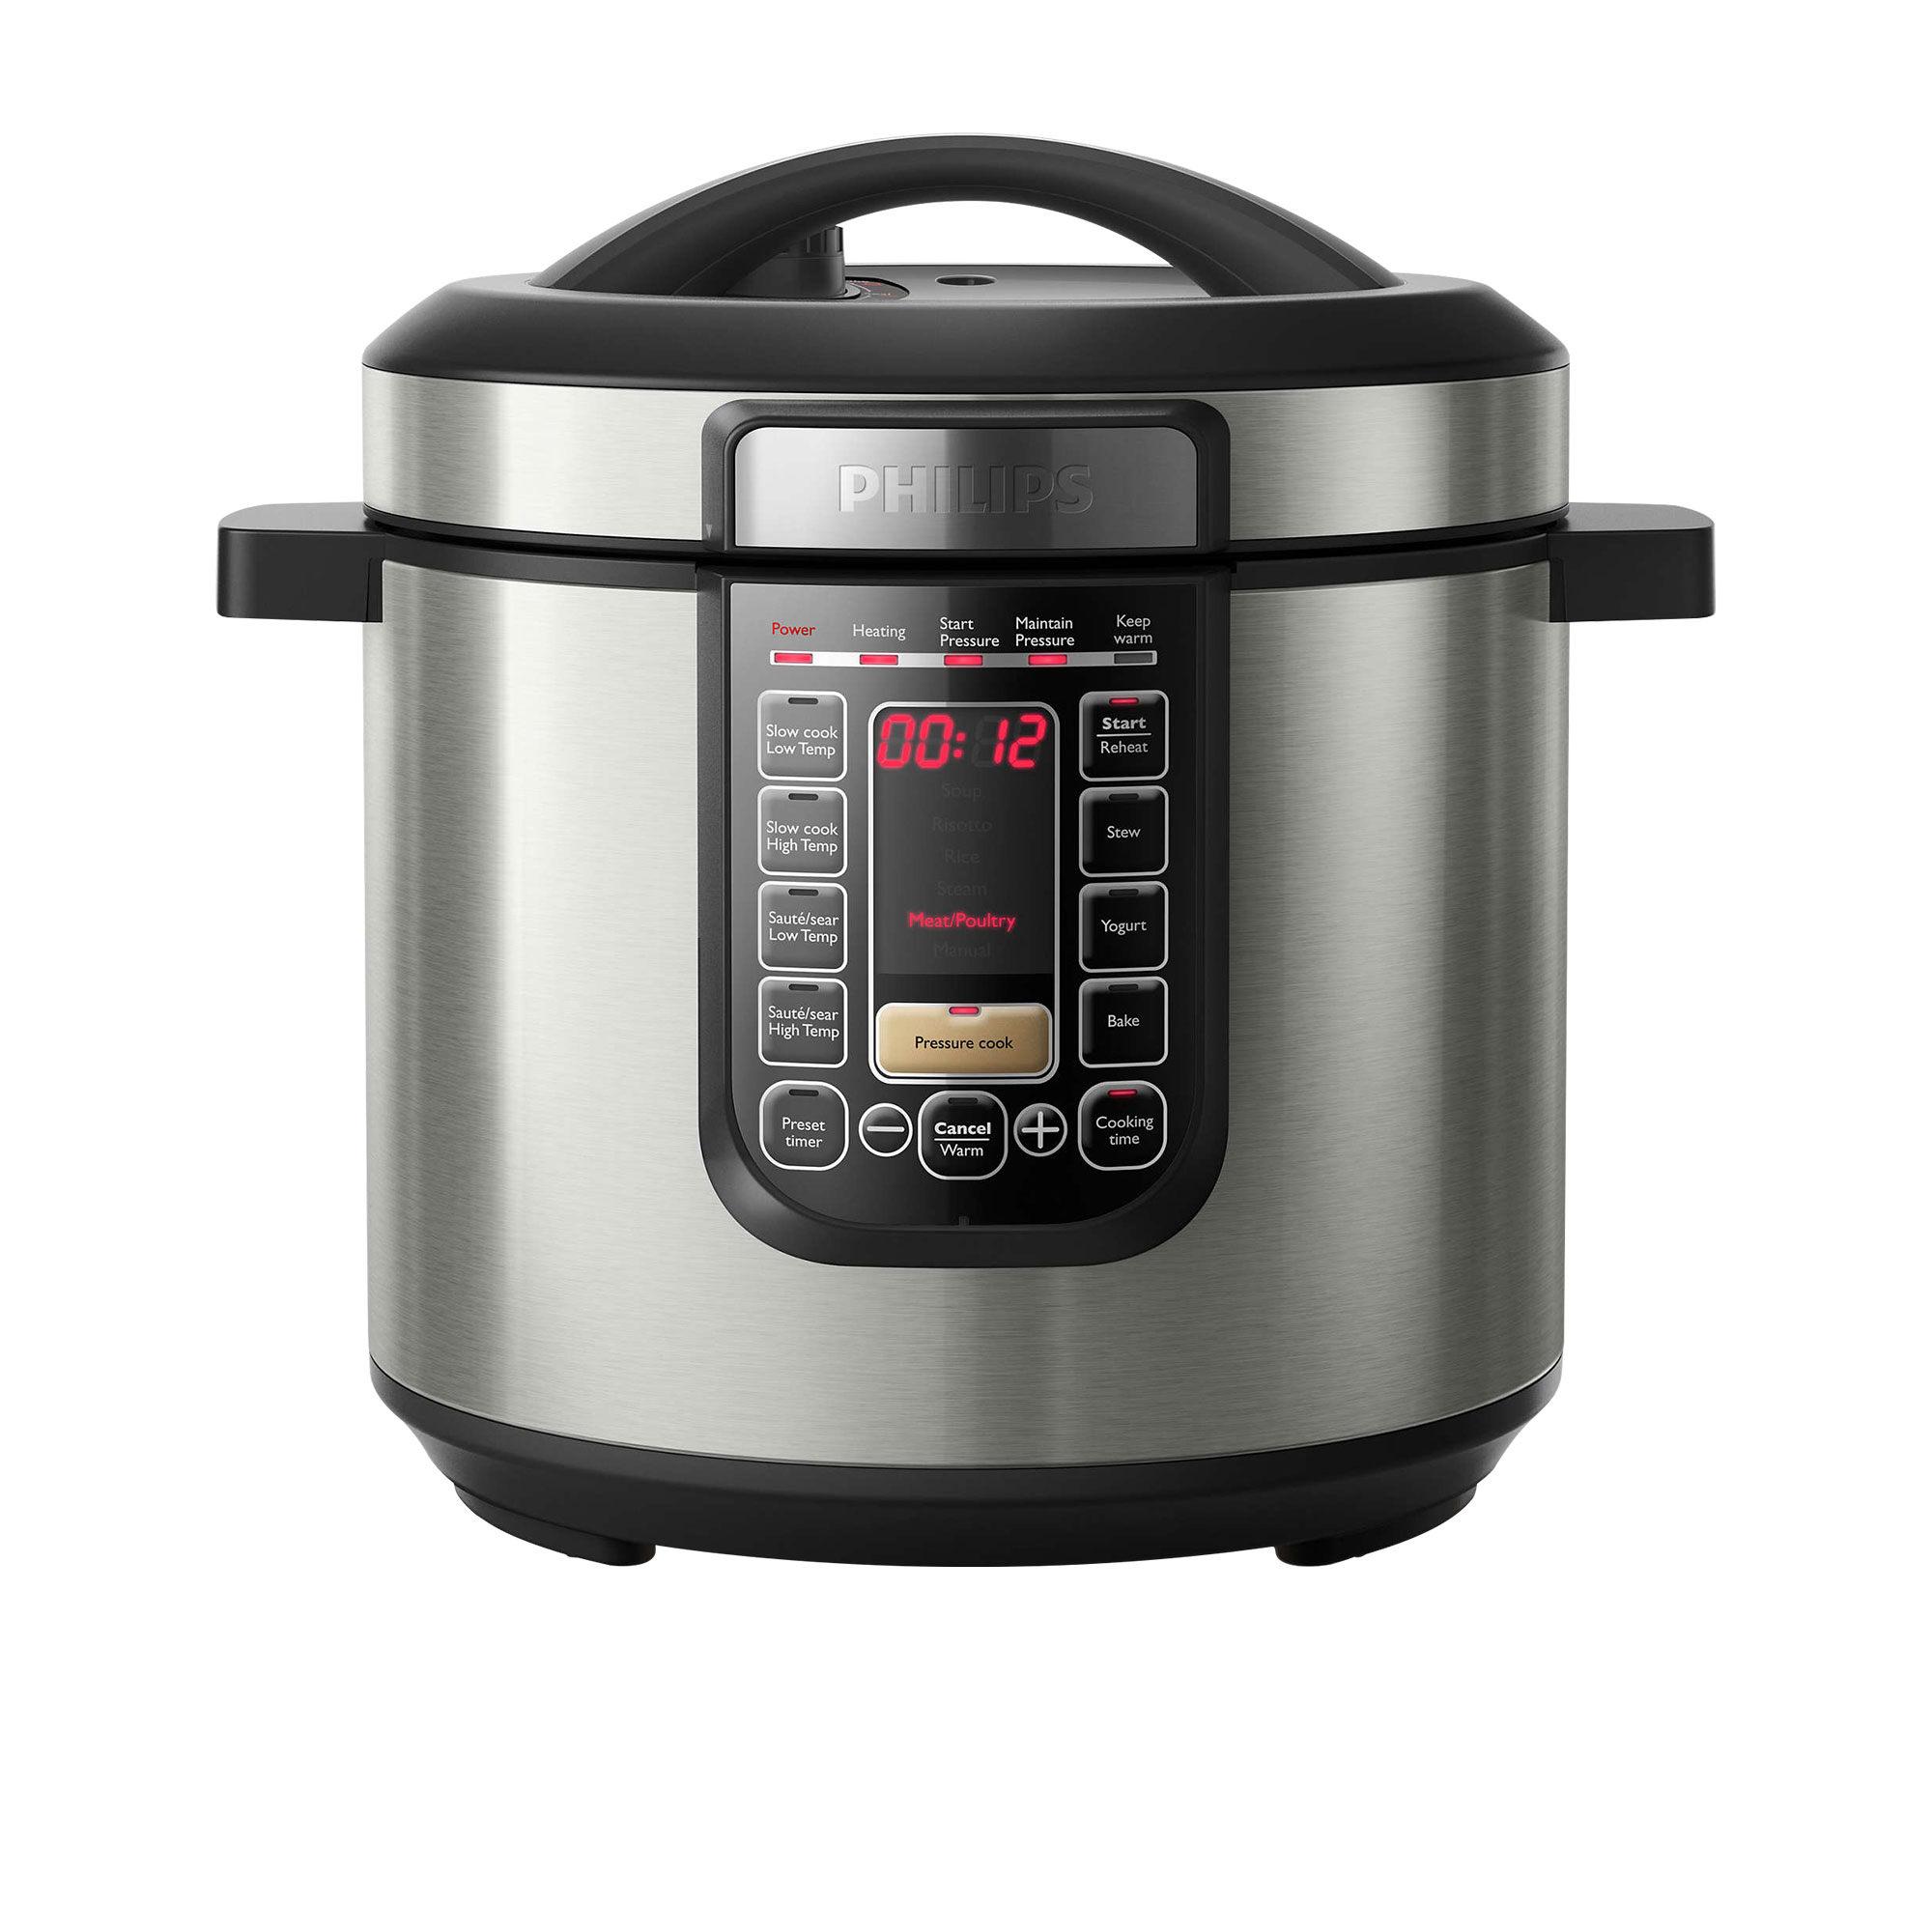 Philips Viva Collection HD2237/72 All in One Cooker 6L Silver Image 1